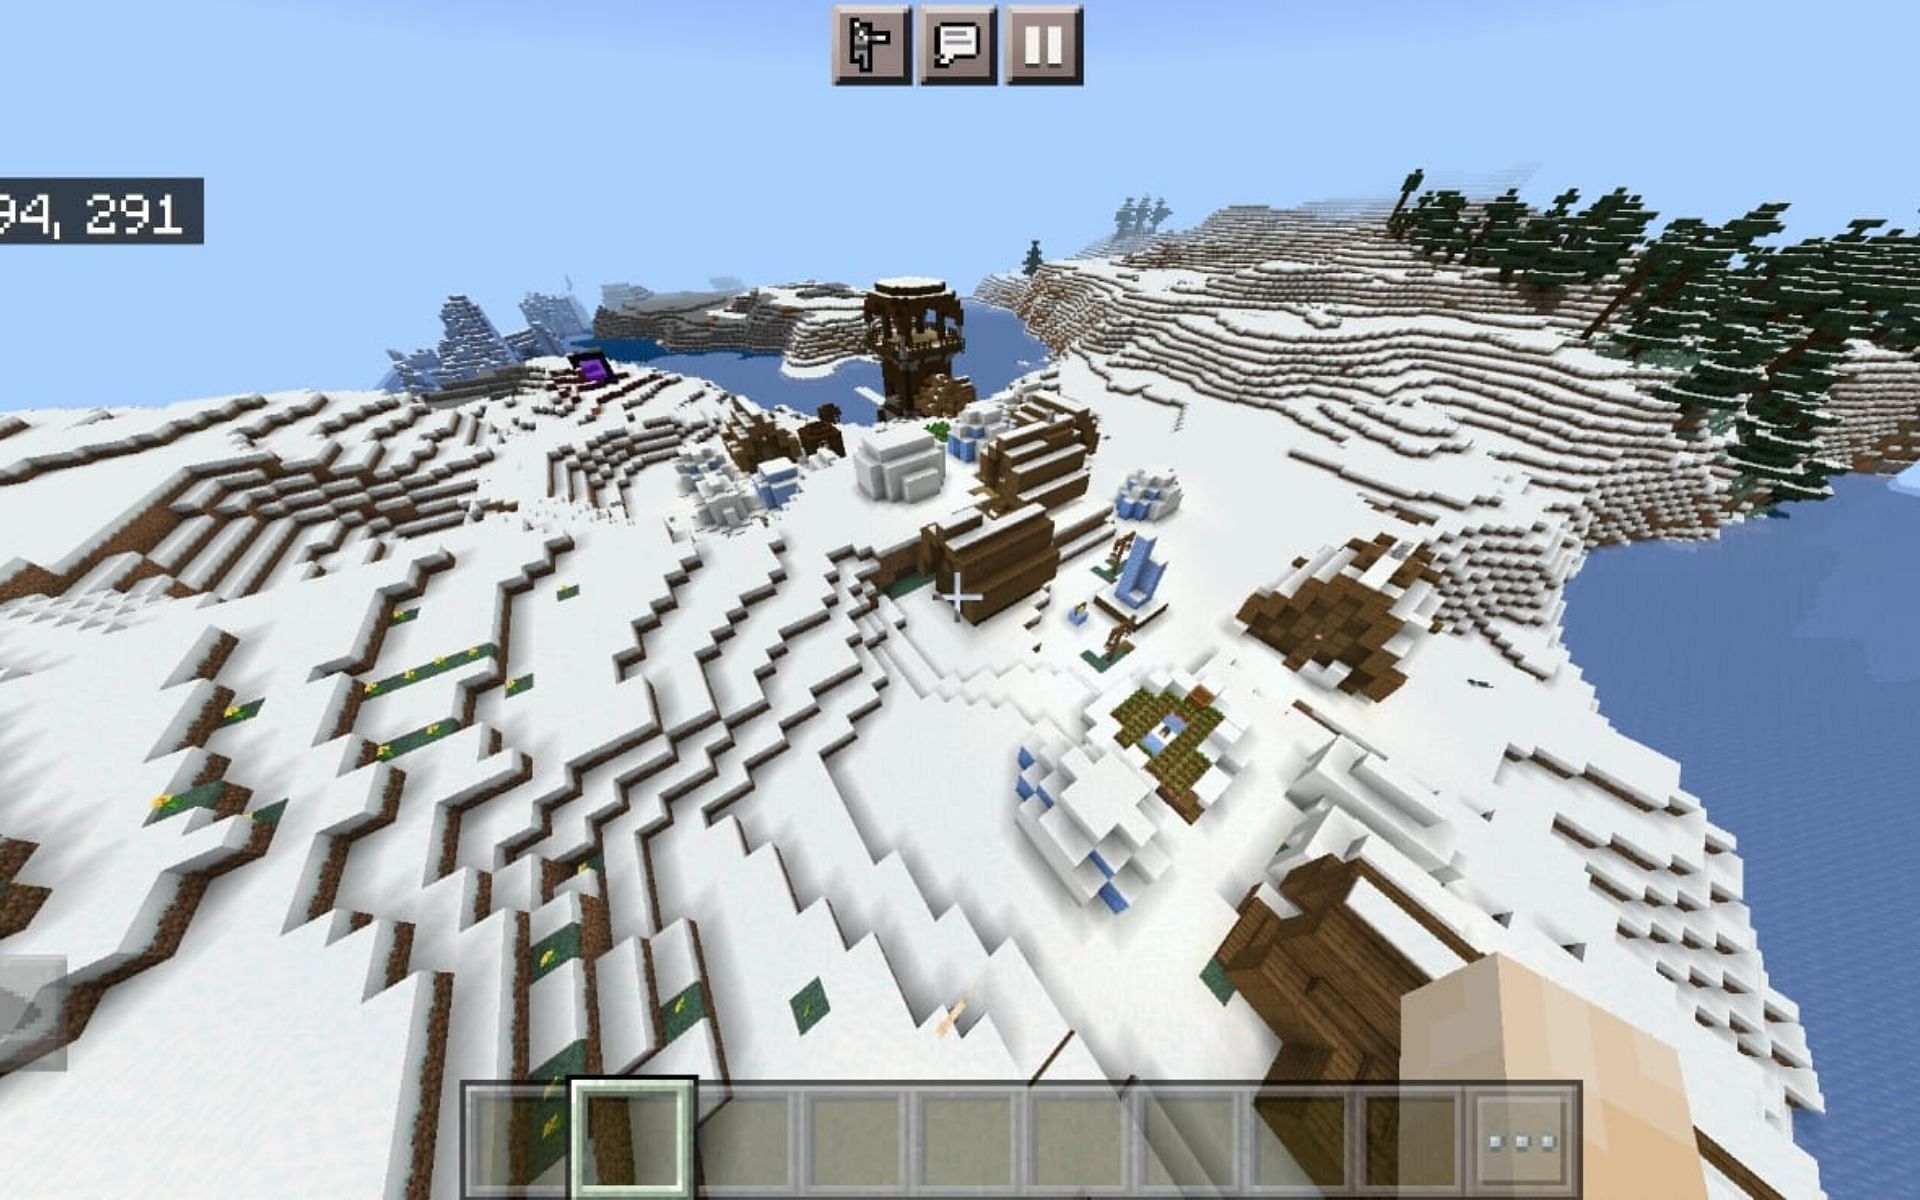 Village with Outpost nearby (Image via Minecraft)